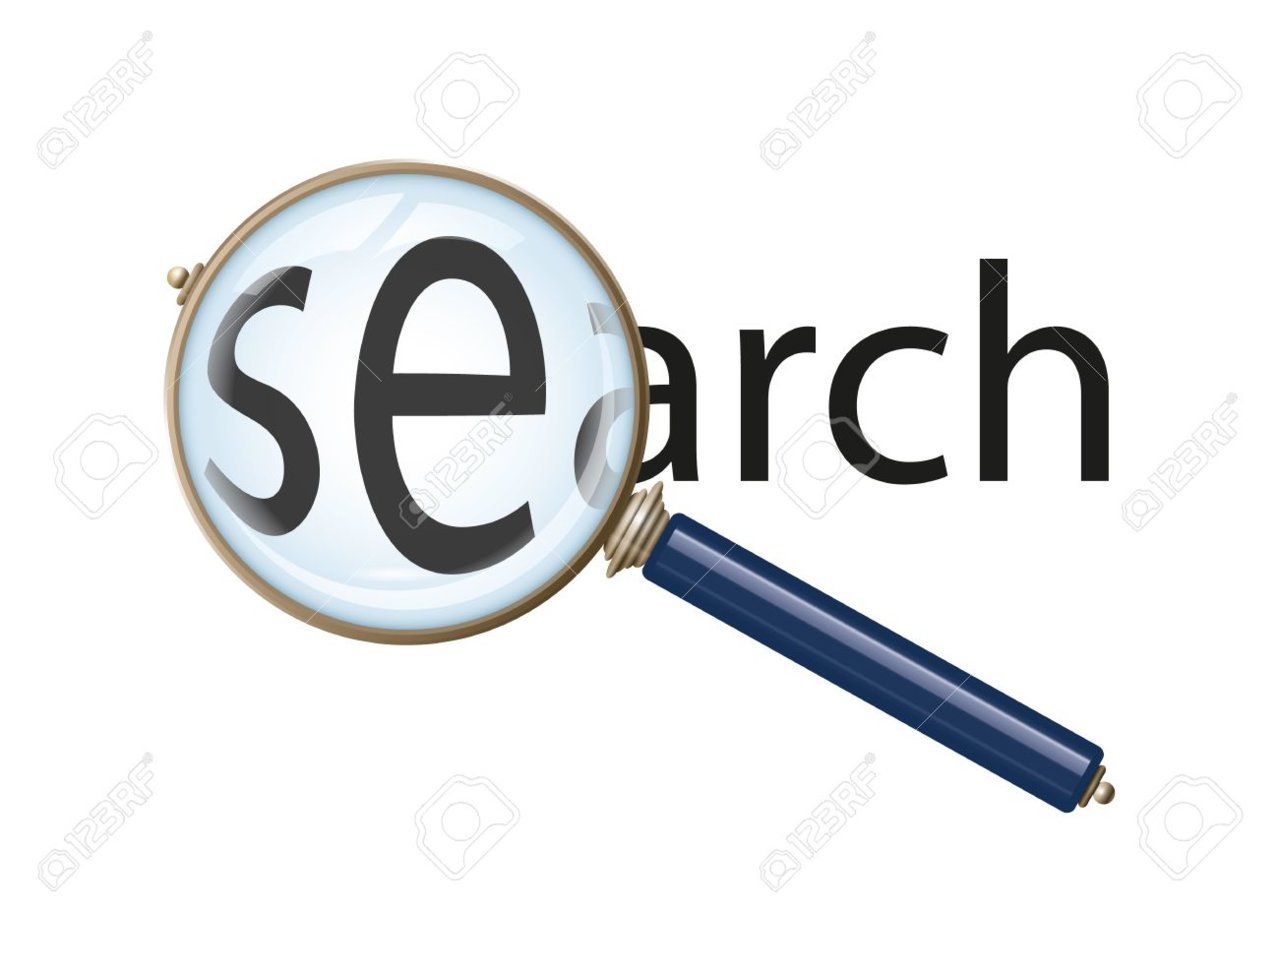 8775162-a-magnifying-glass-with-the-word-search-Stock-Photo.jpg